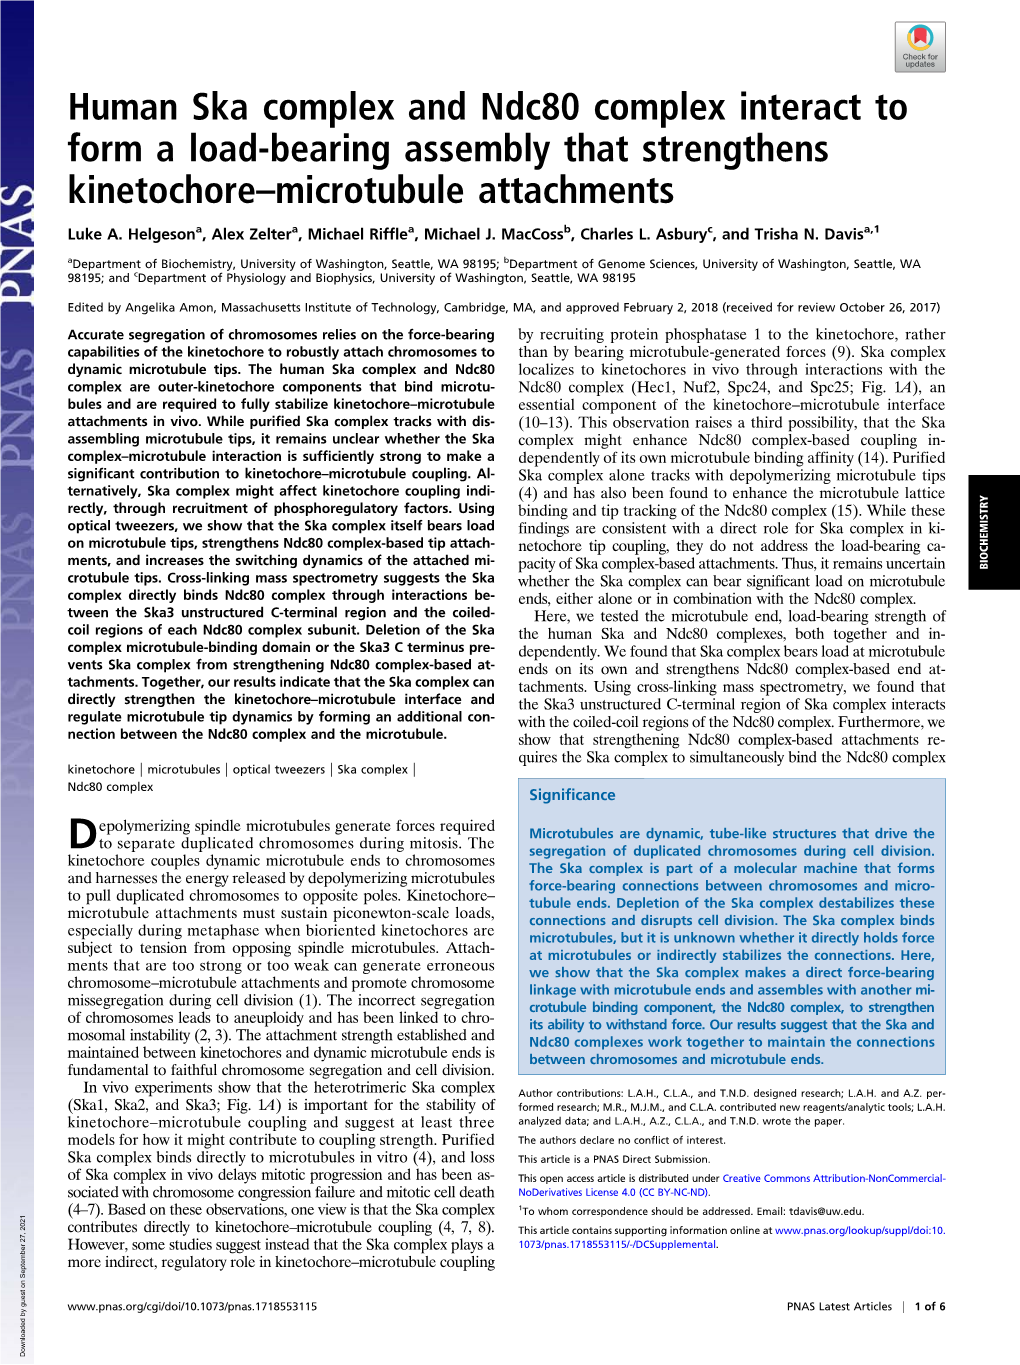 Human Ska Complex and Ndc80 Complex Interact to Form a Load-Bearing Assembly That Strengthens Kinetochore–Microtubule Attachments